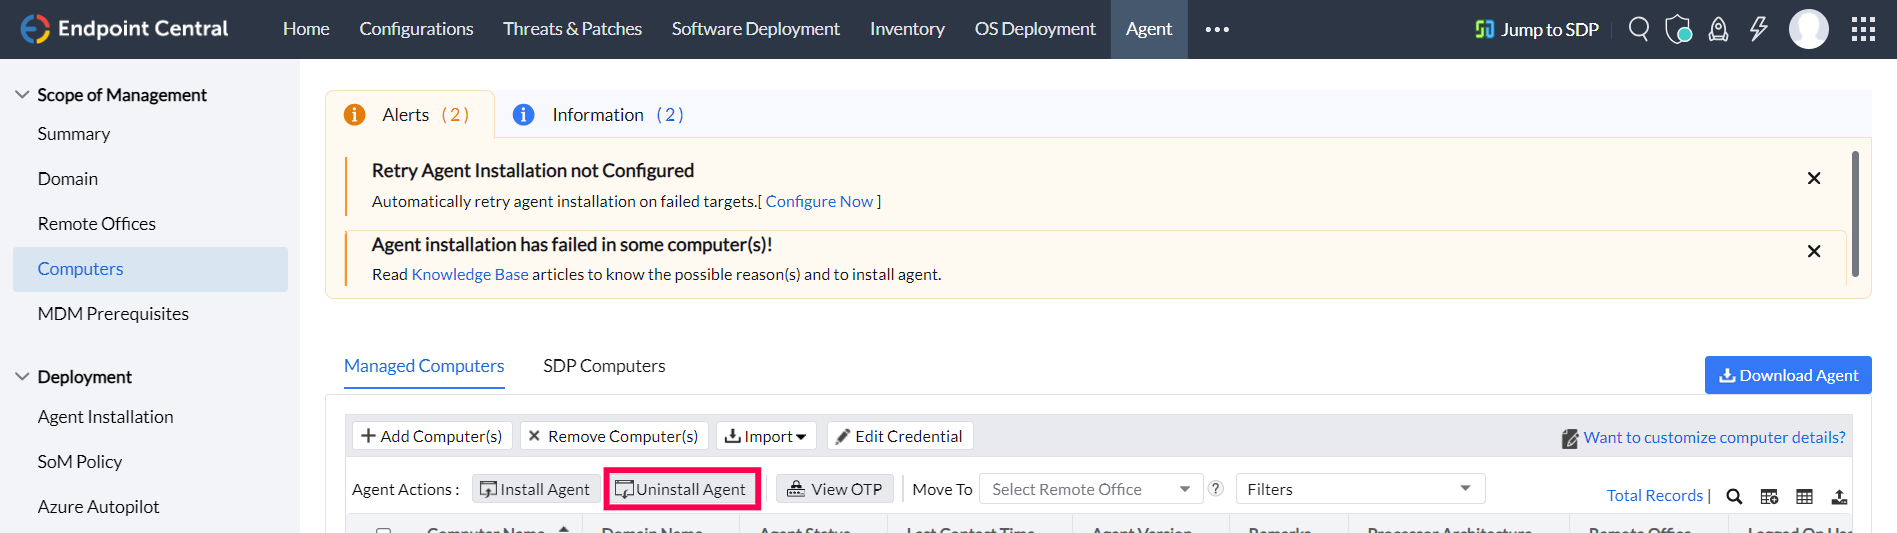 Uninstall agent button in Endpoint Central Console